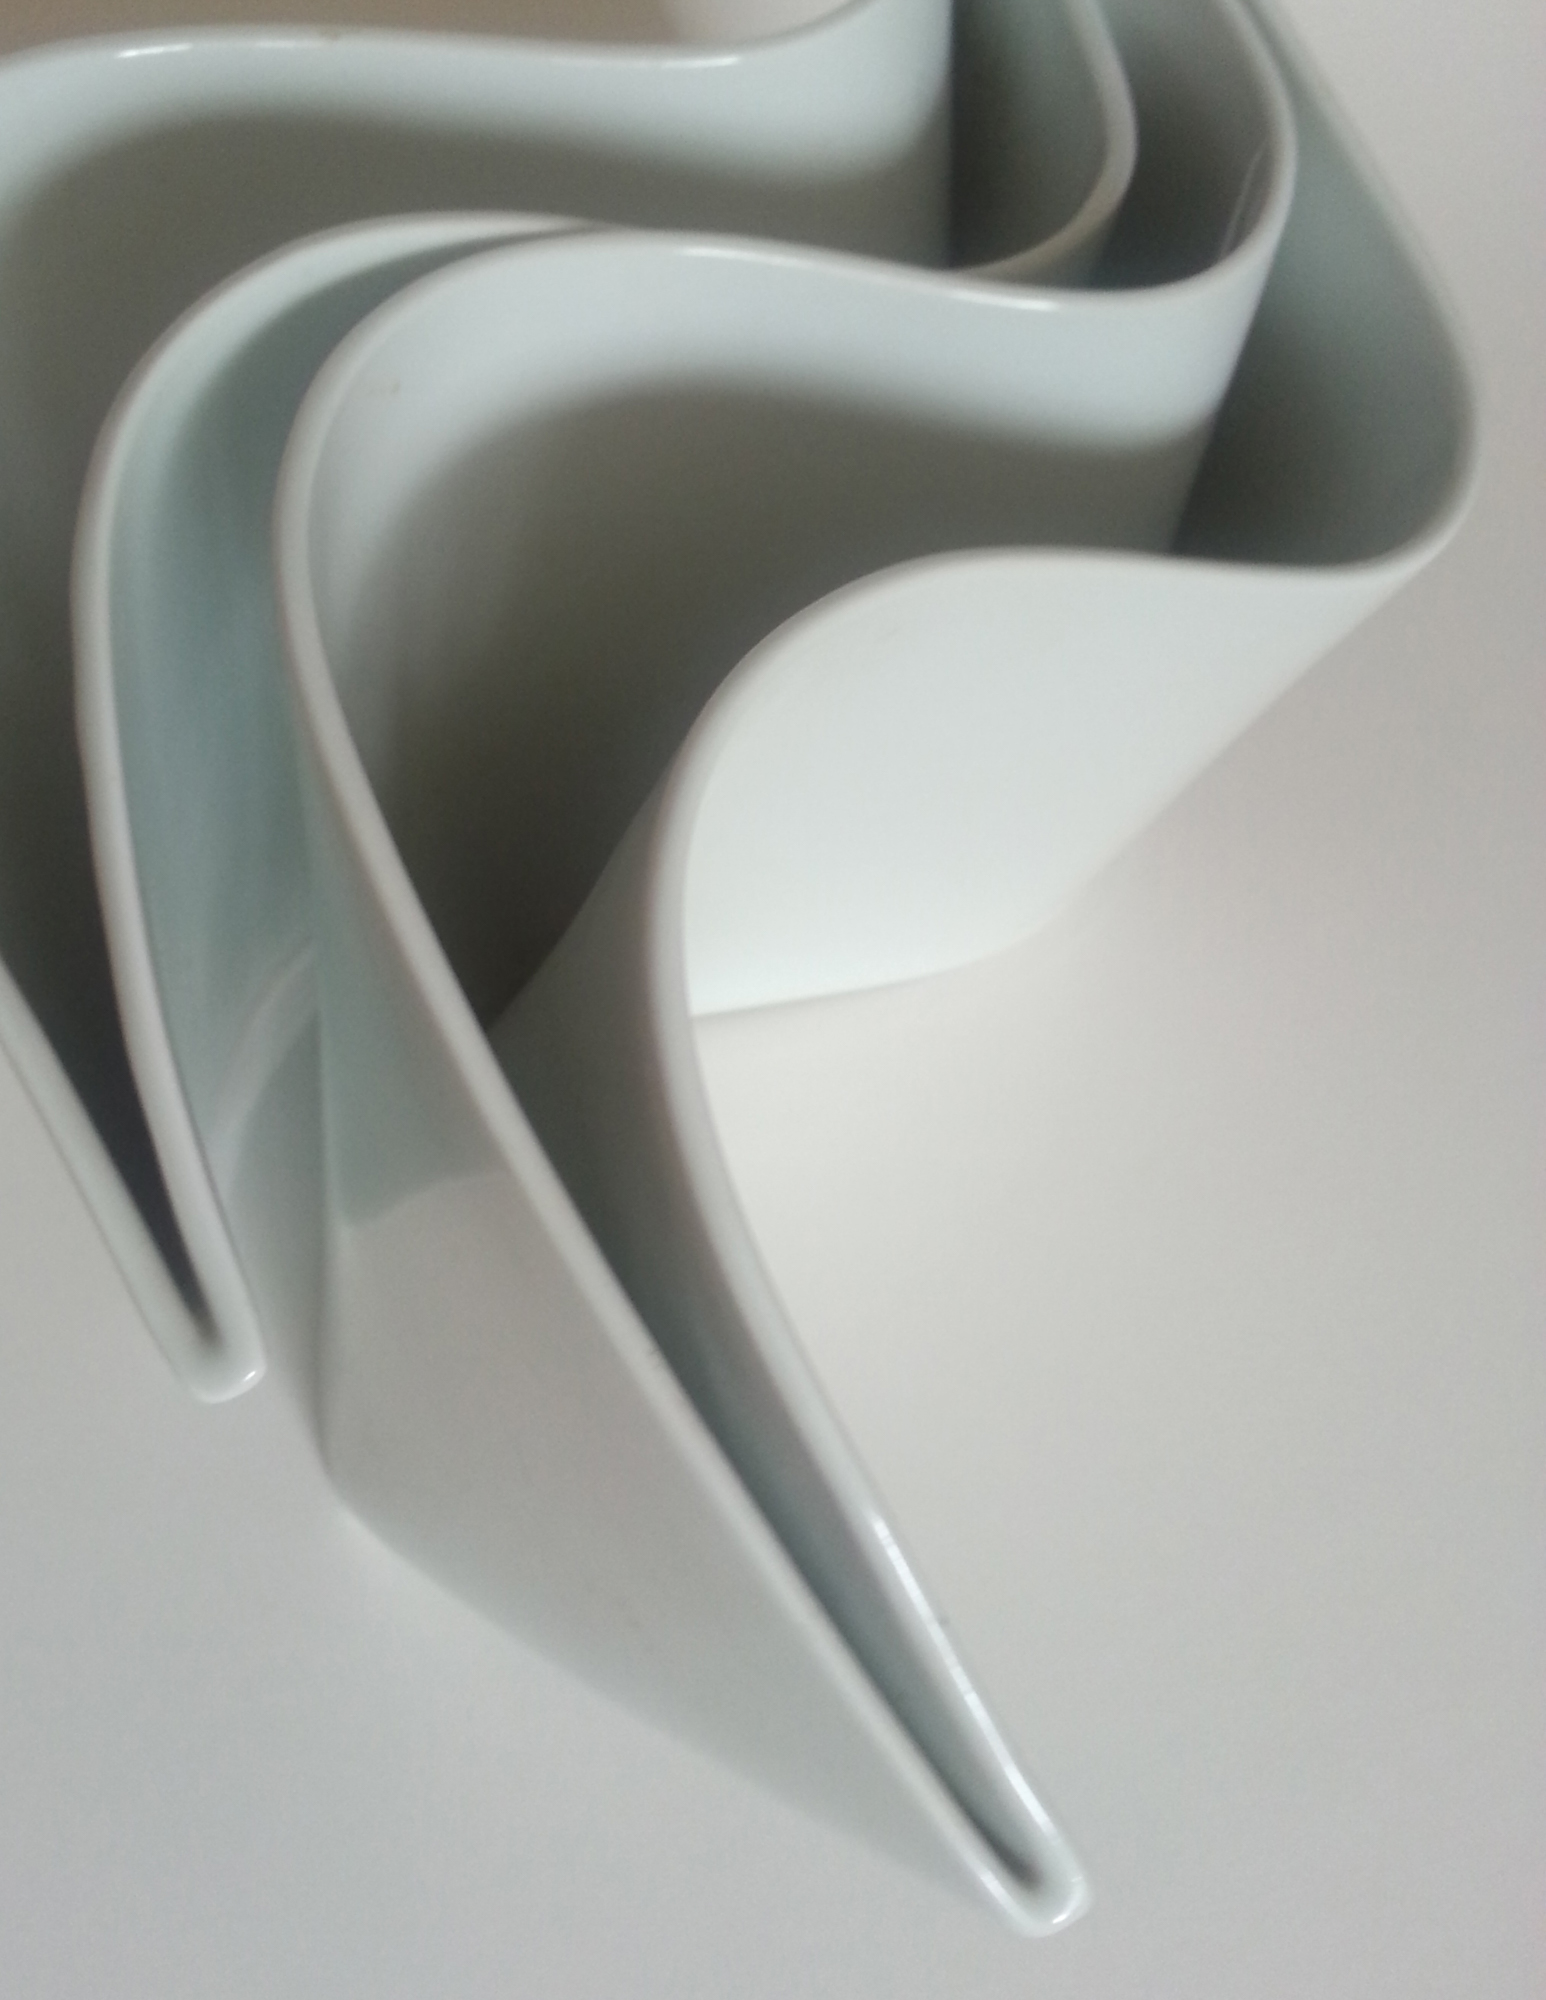 close-up of a vase made of curved white planes